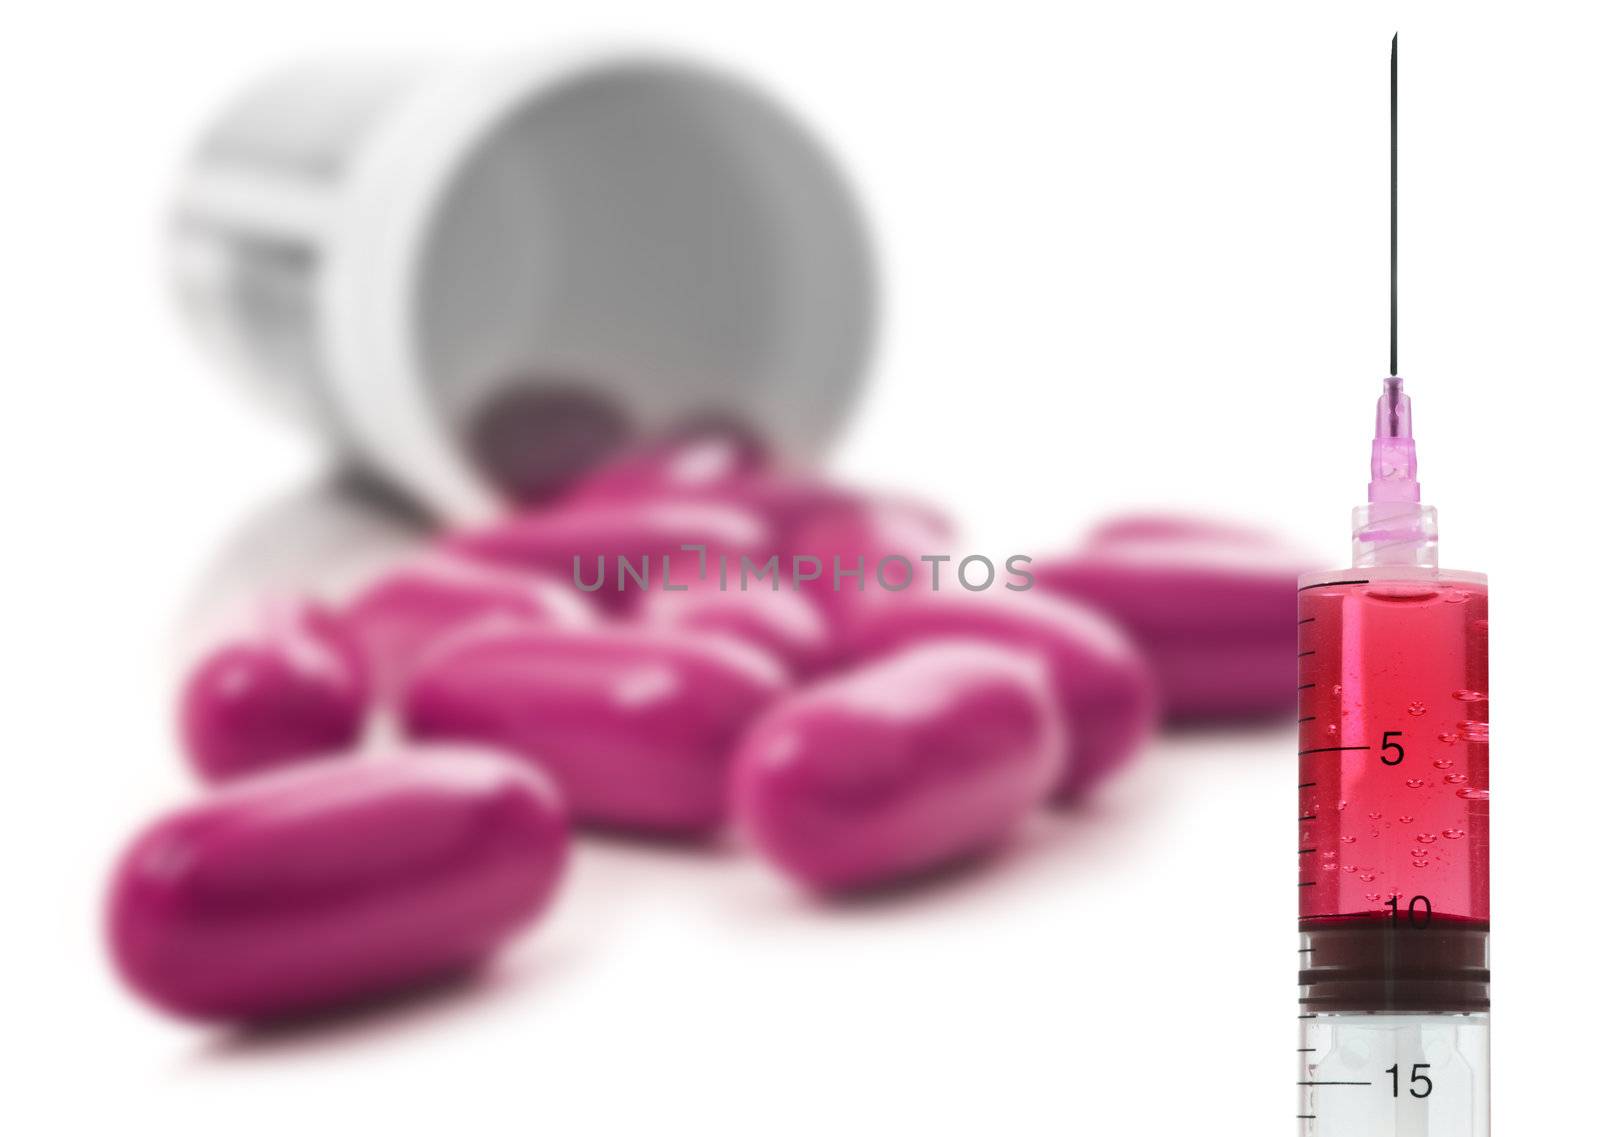 Pink pills an pill bottle on white background by tish1